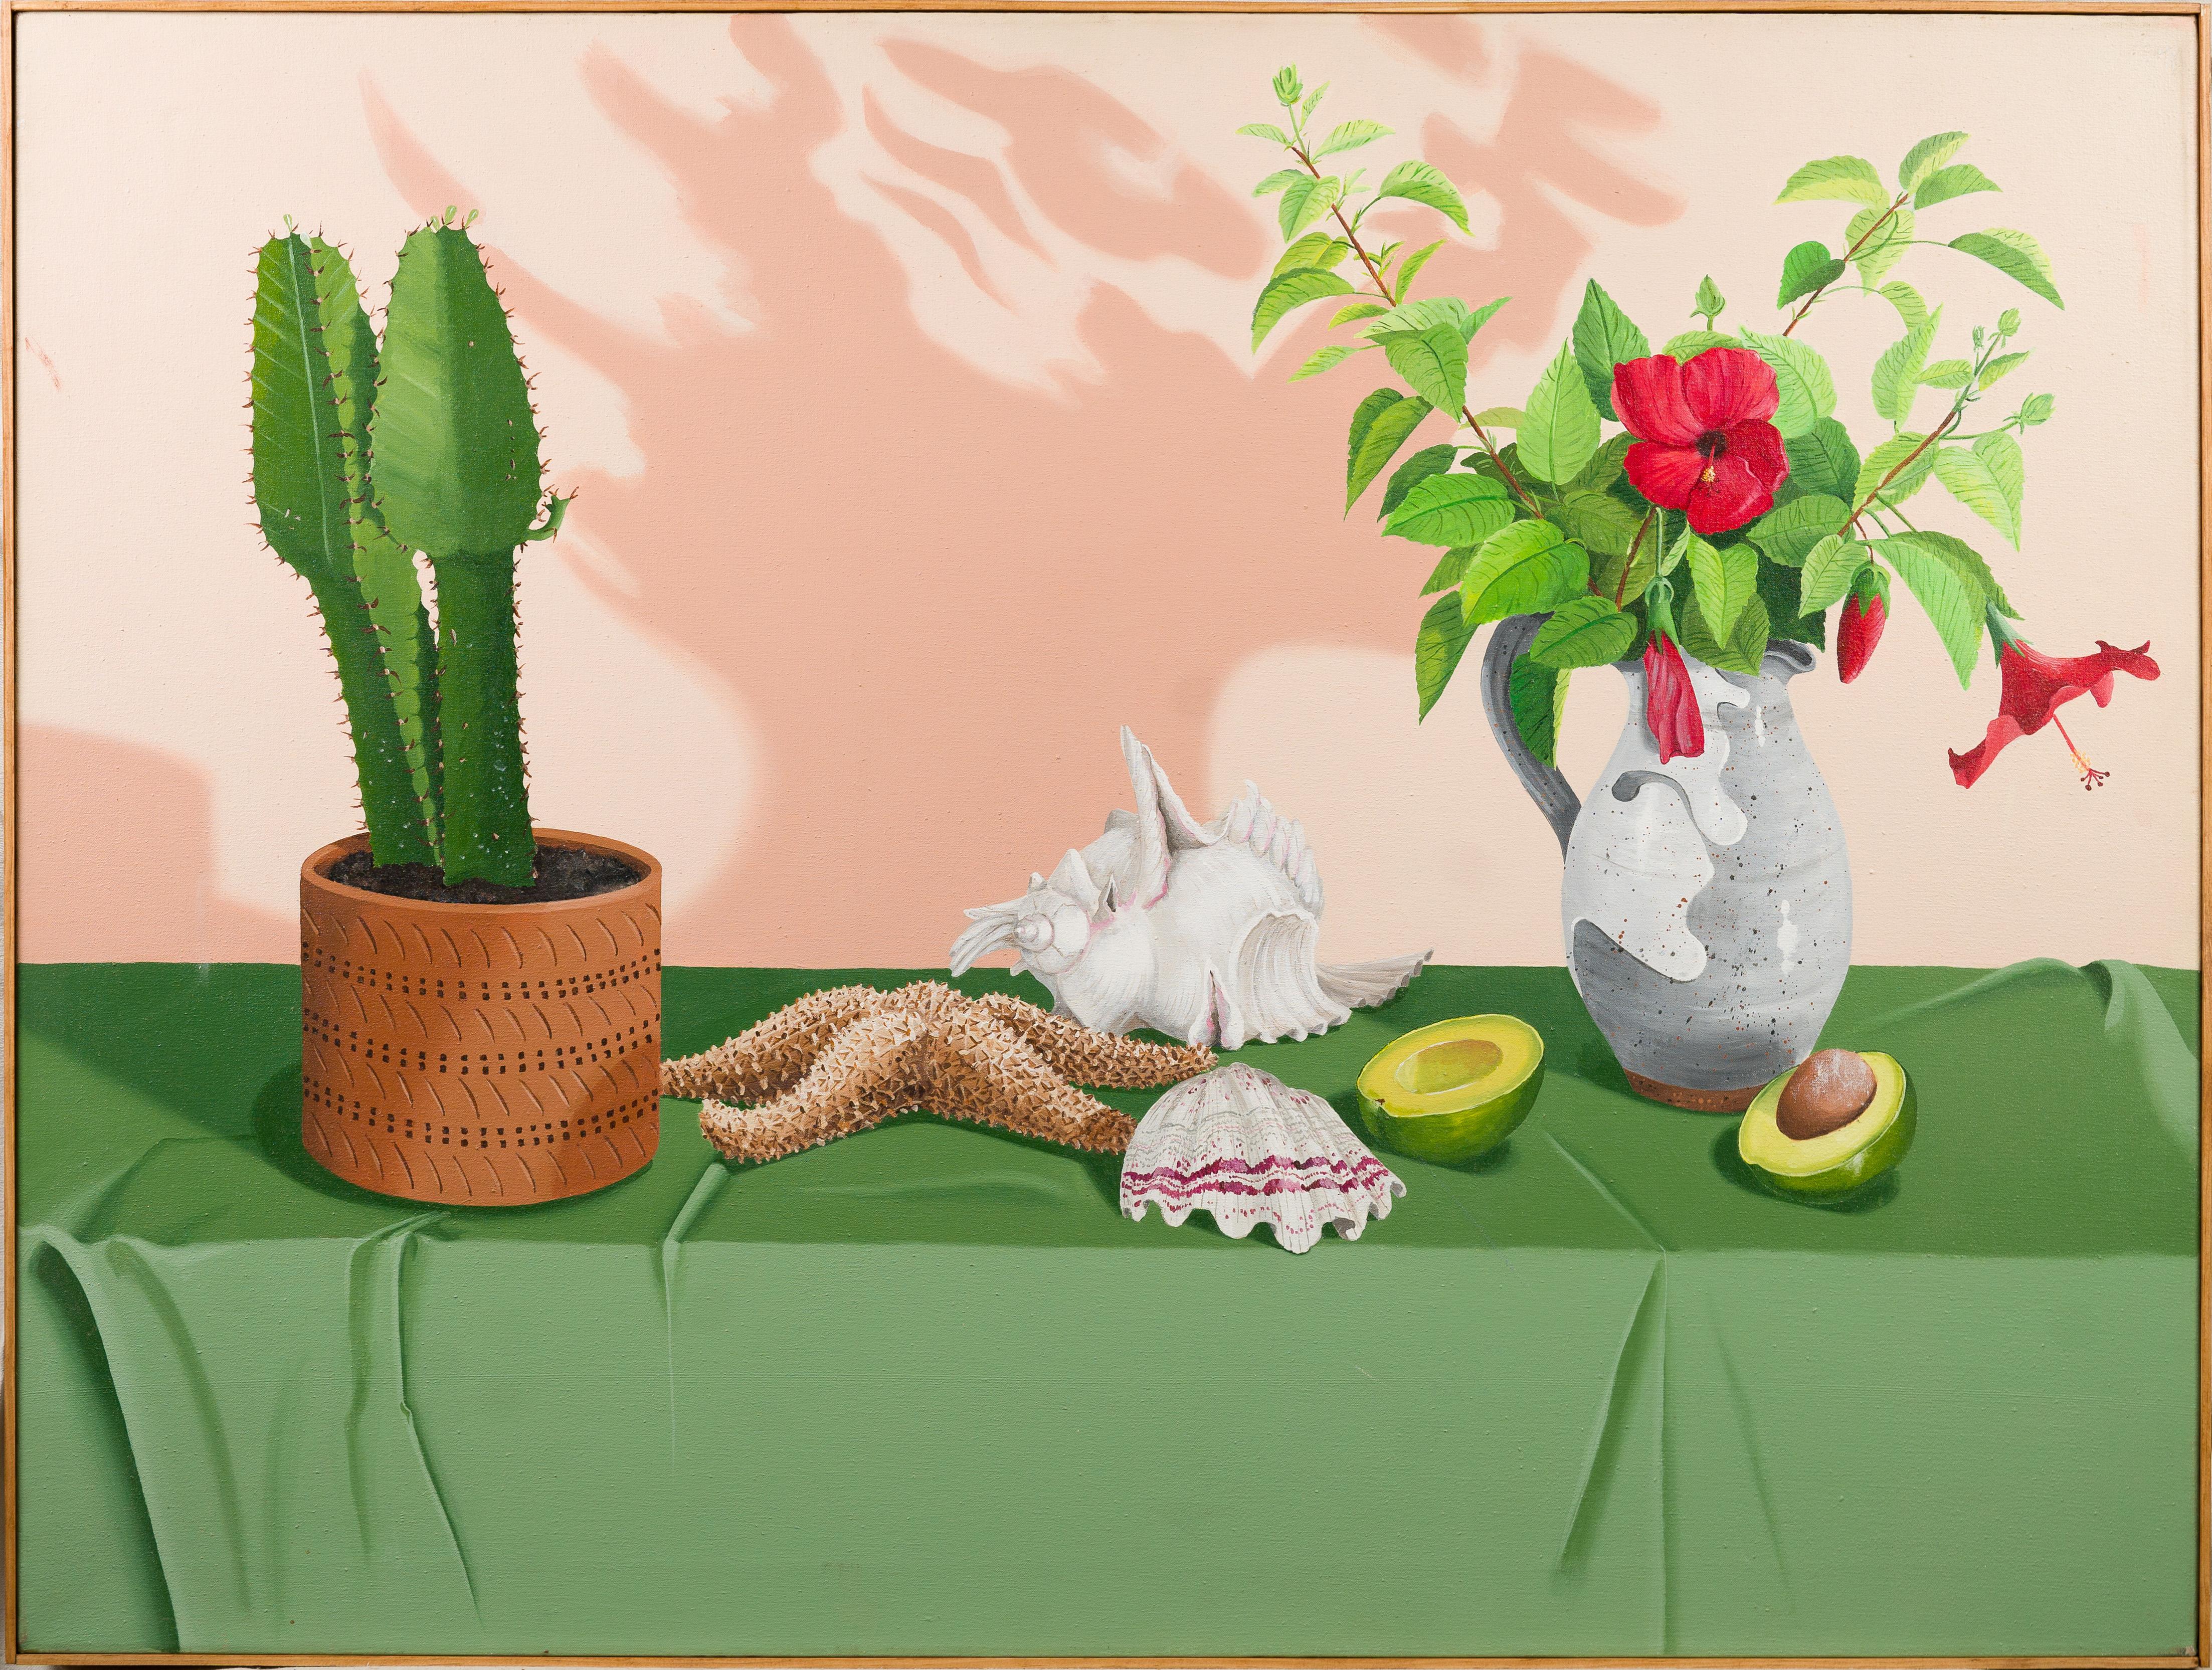 Vintage American Modernist Super Realist Trompe L'Oeil Cactus Avacado Still Life - Painting by Unknown